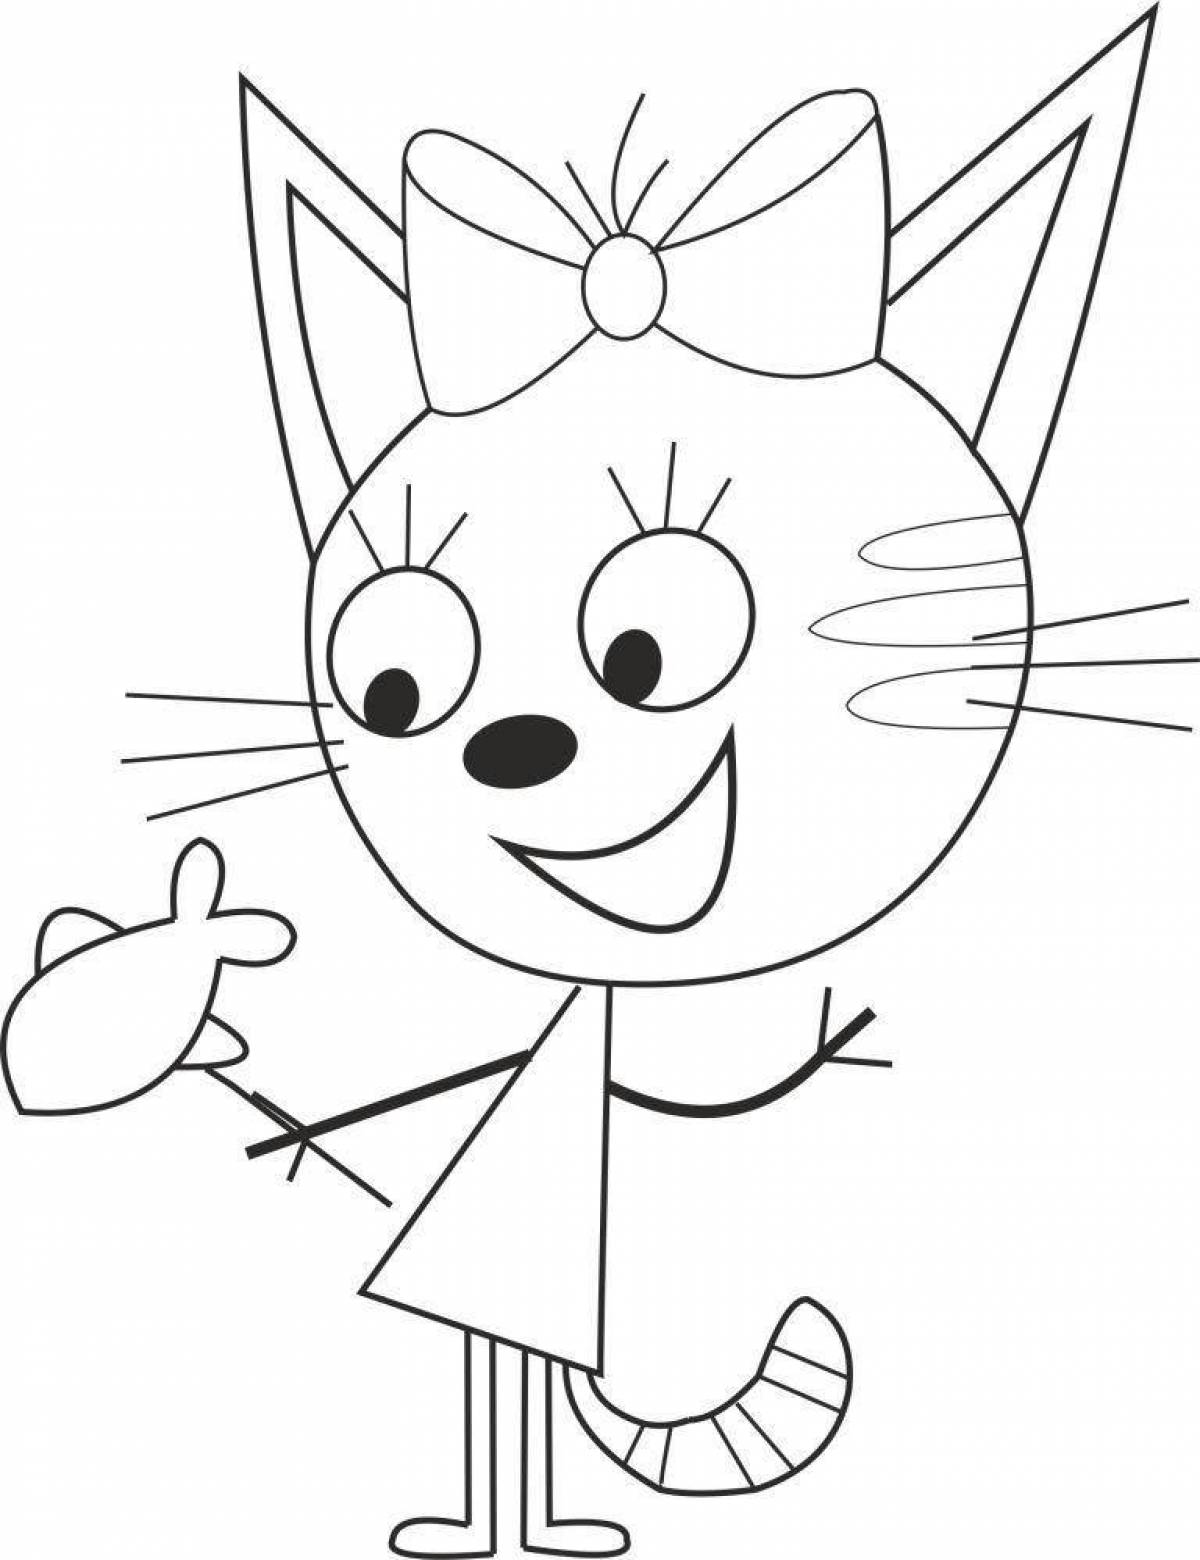 Three cats fun coloring book for kids